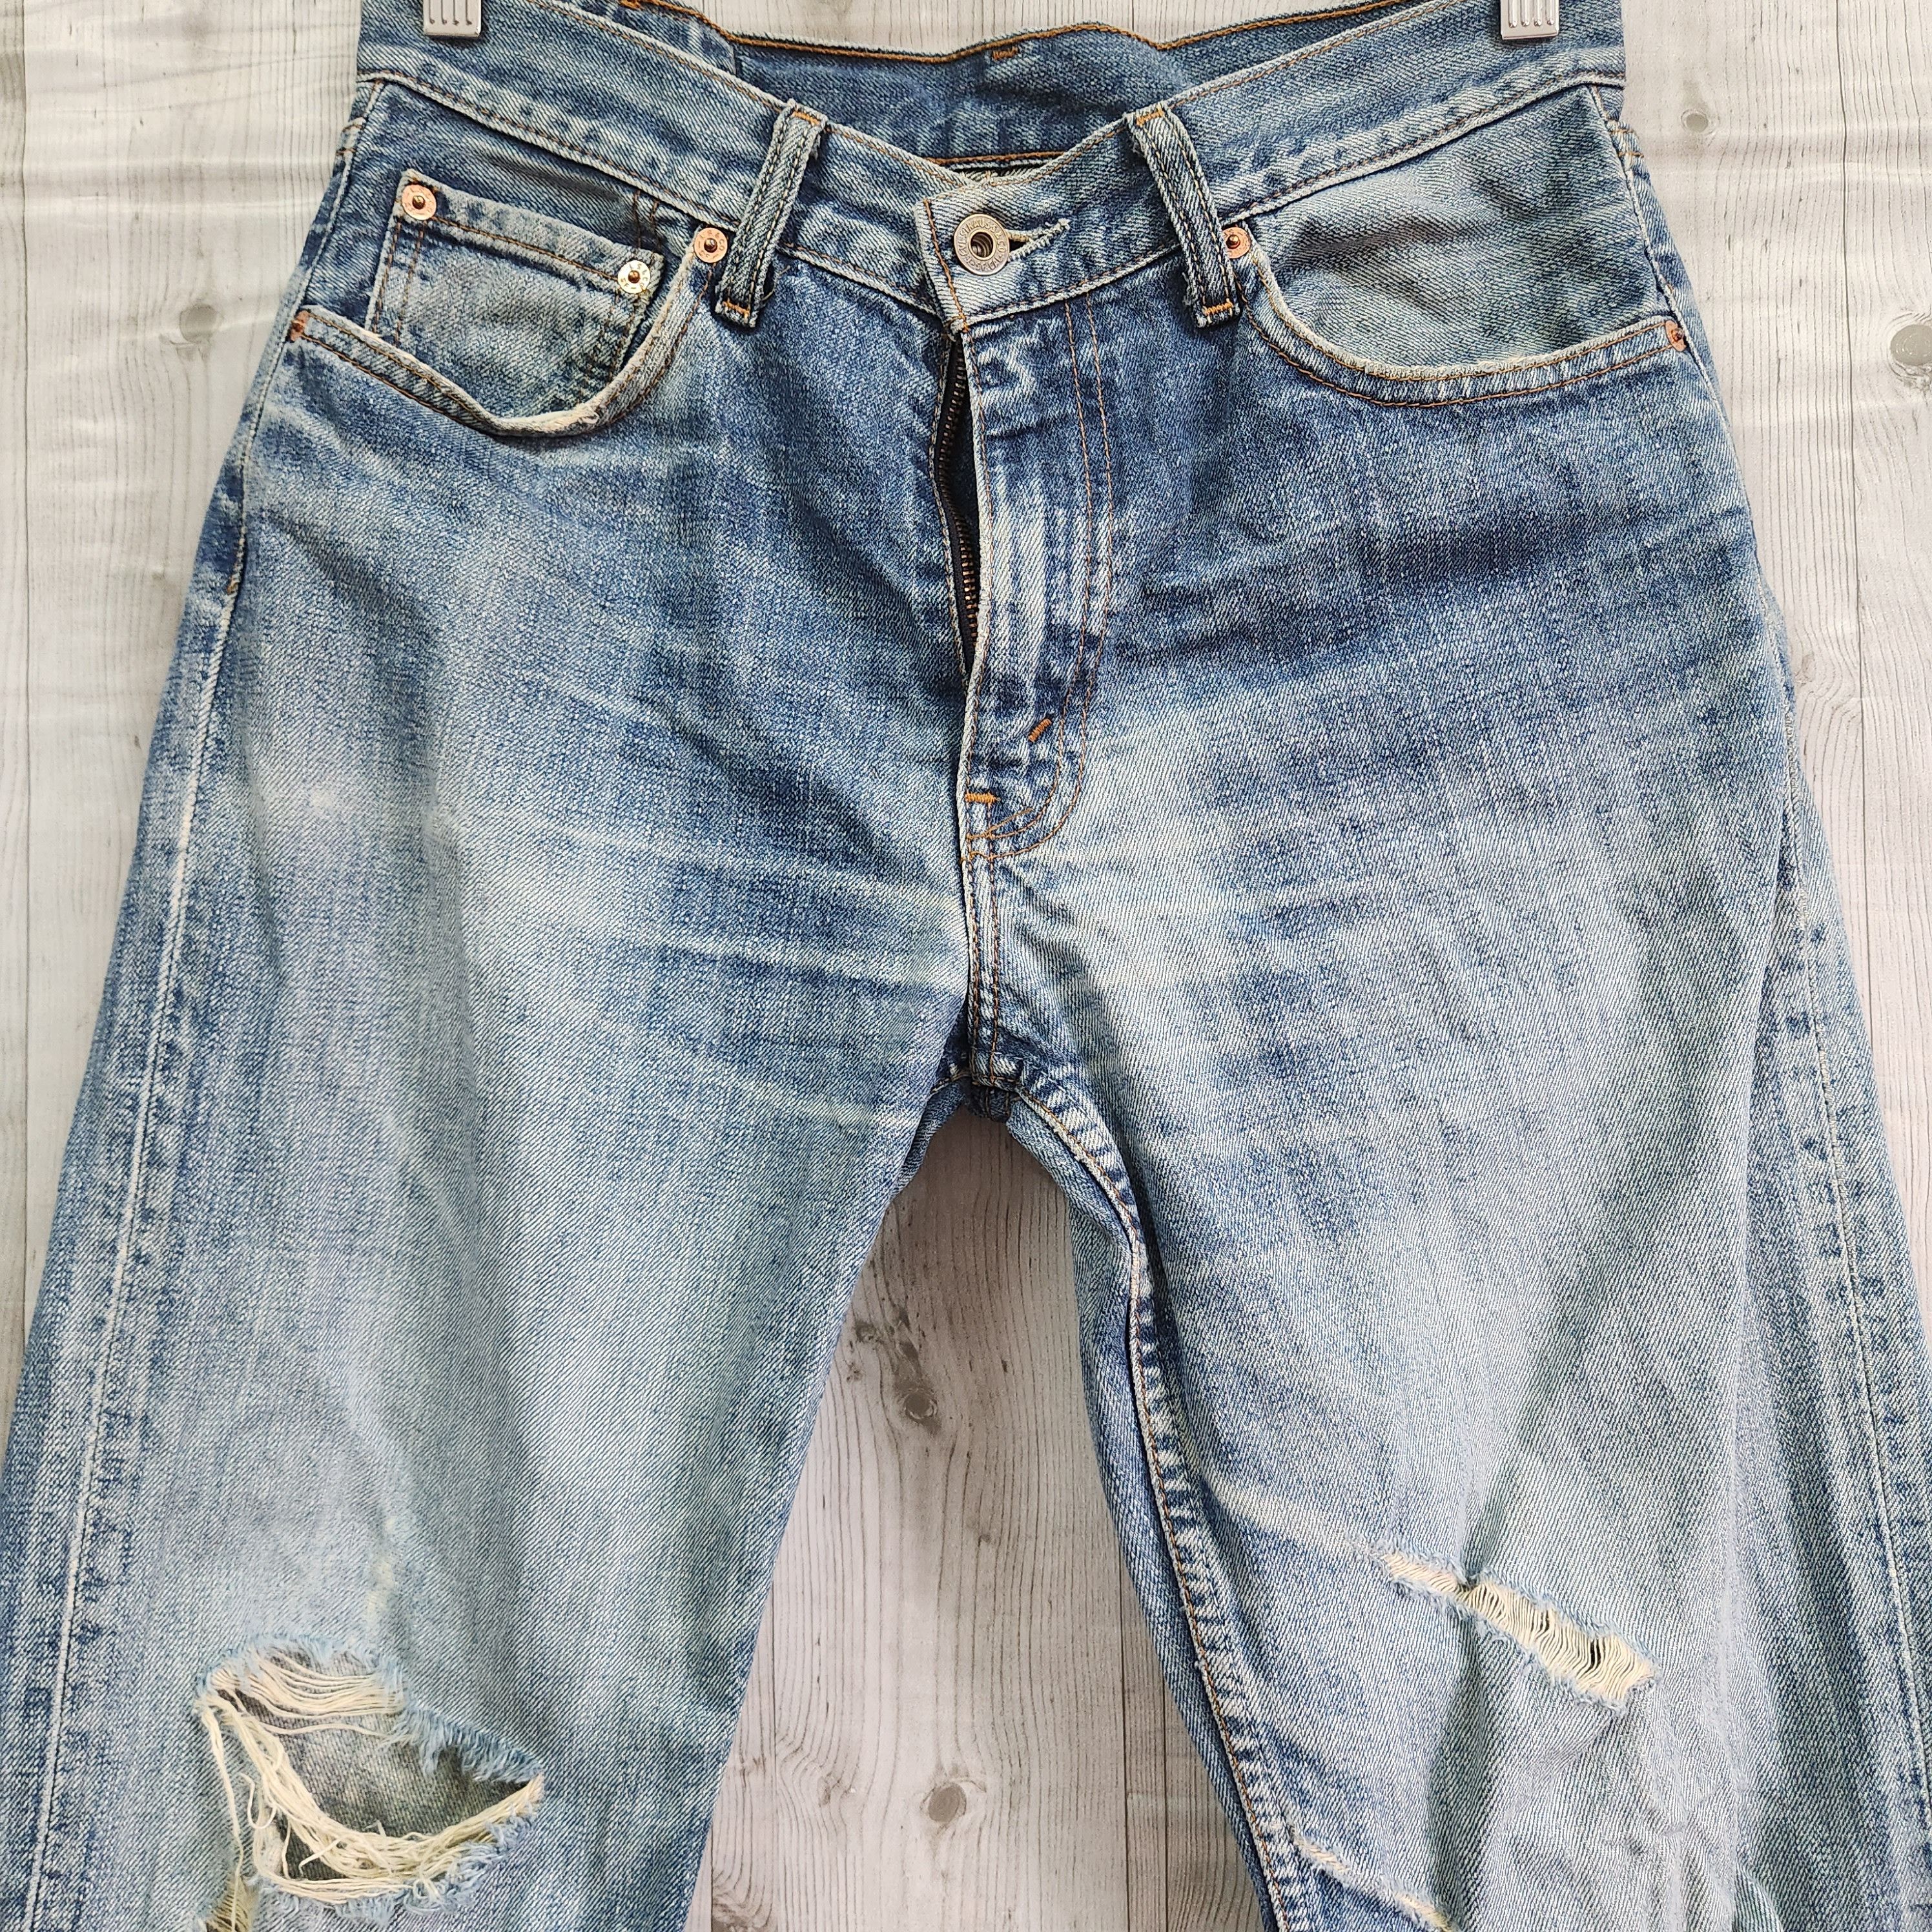 Levis 502 Vintage Distressed Ripped Denim Jeans Year 2002 - 3